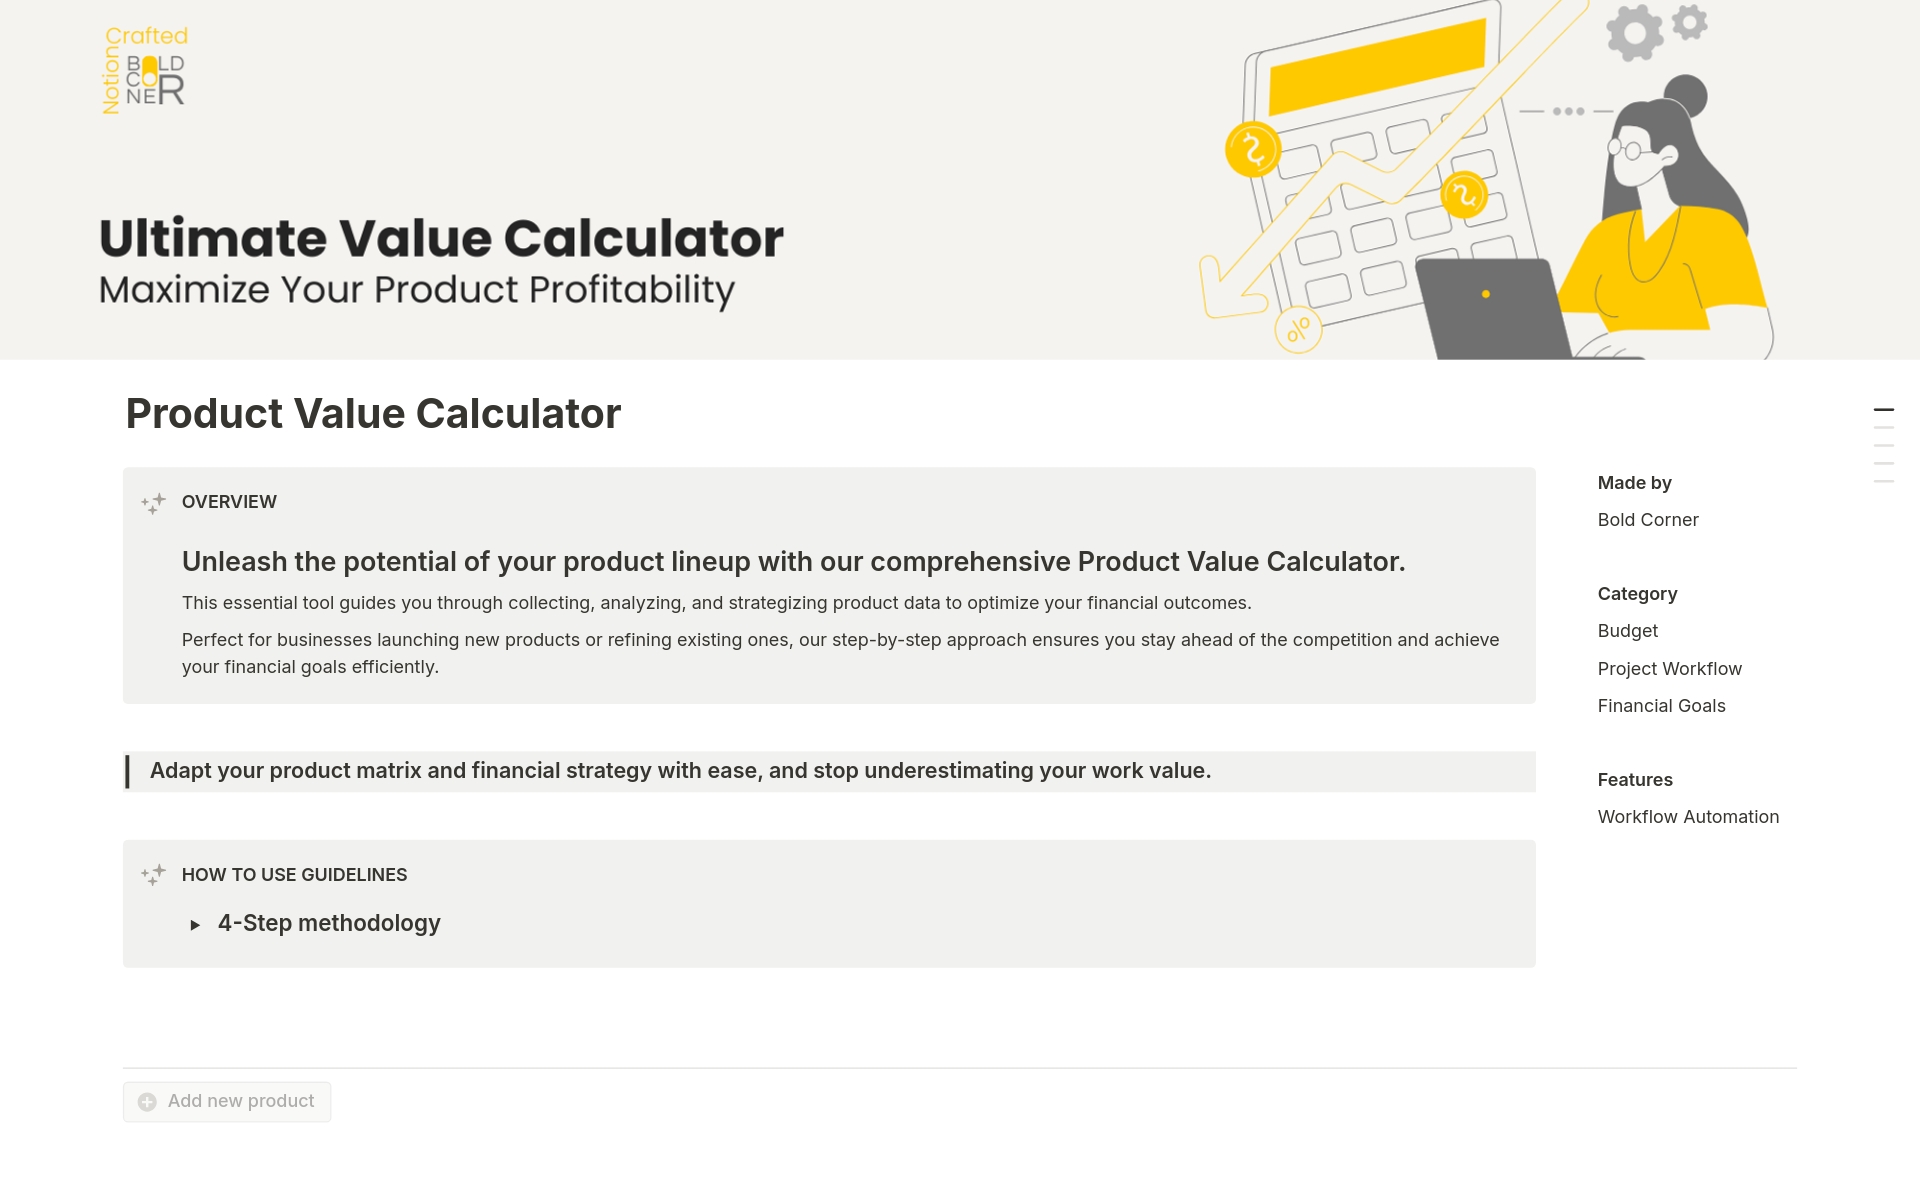 This template has been designed to support small business to get aware of the price setting process and avoid underestimating their work value. 
It also offers an opportunity to diversify their product matrix and build coherent financial goals.